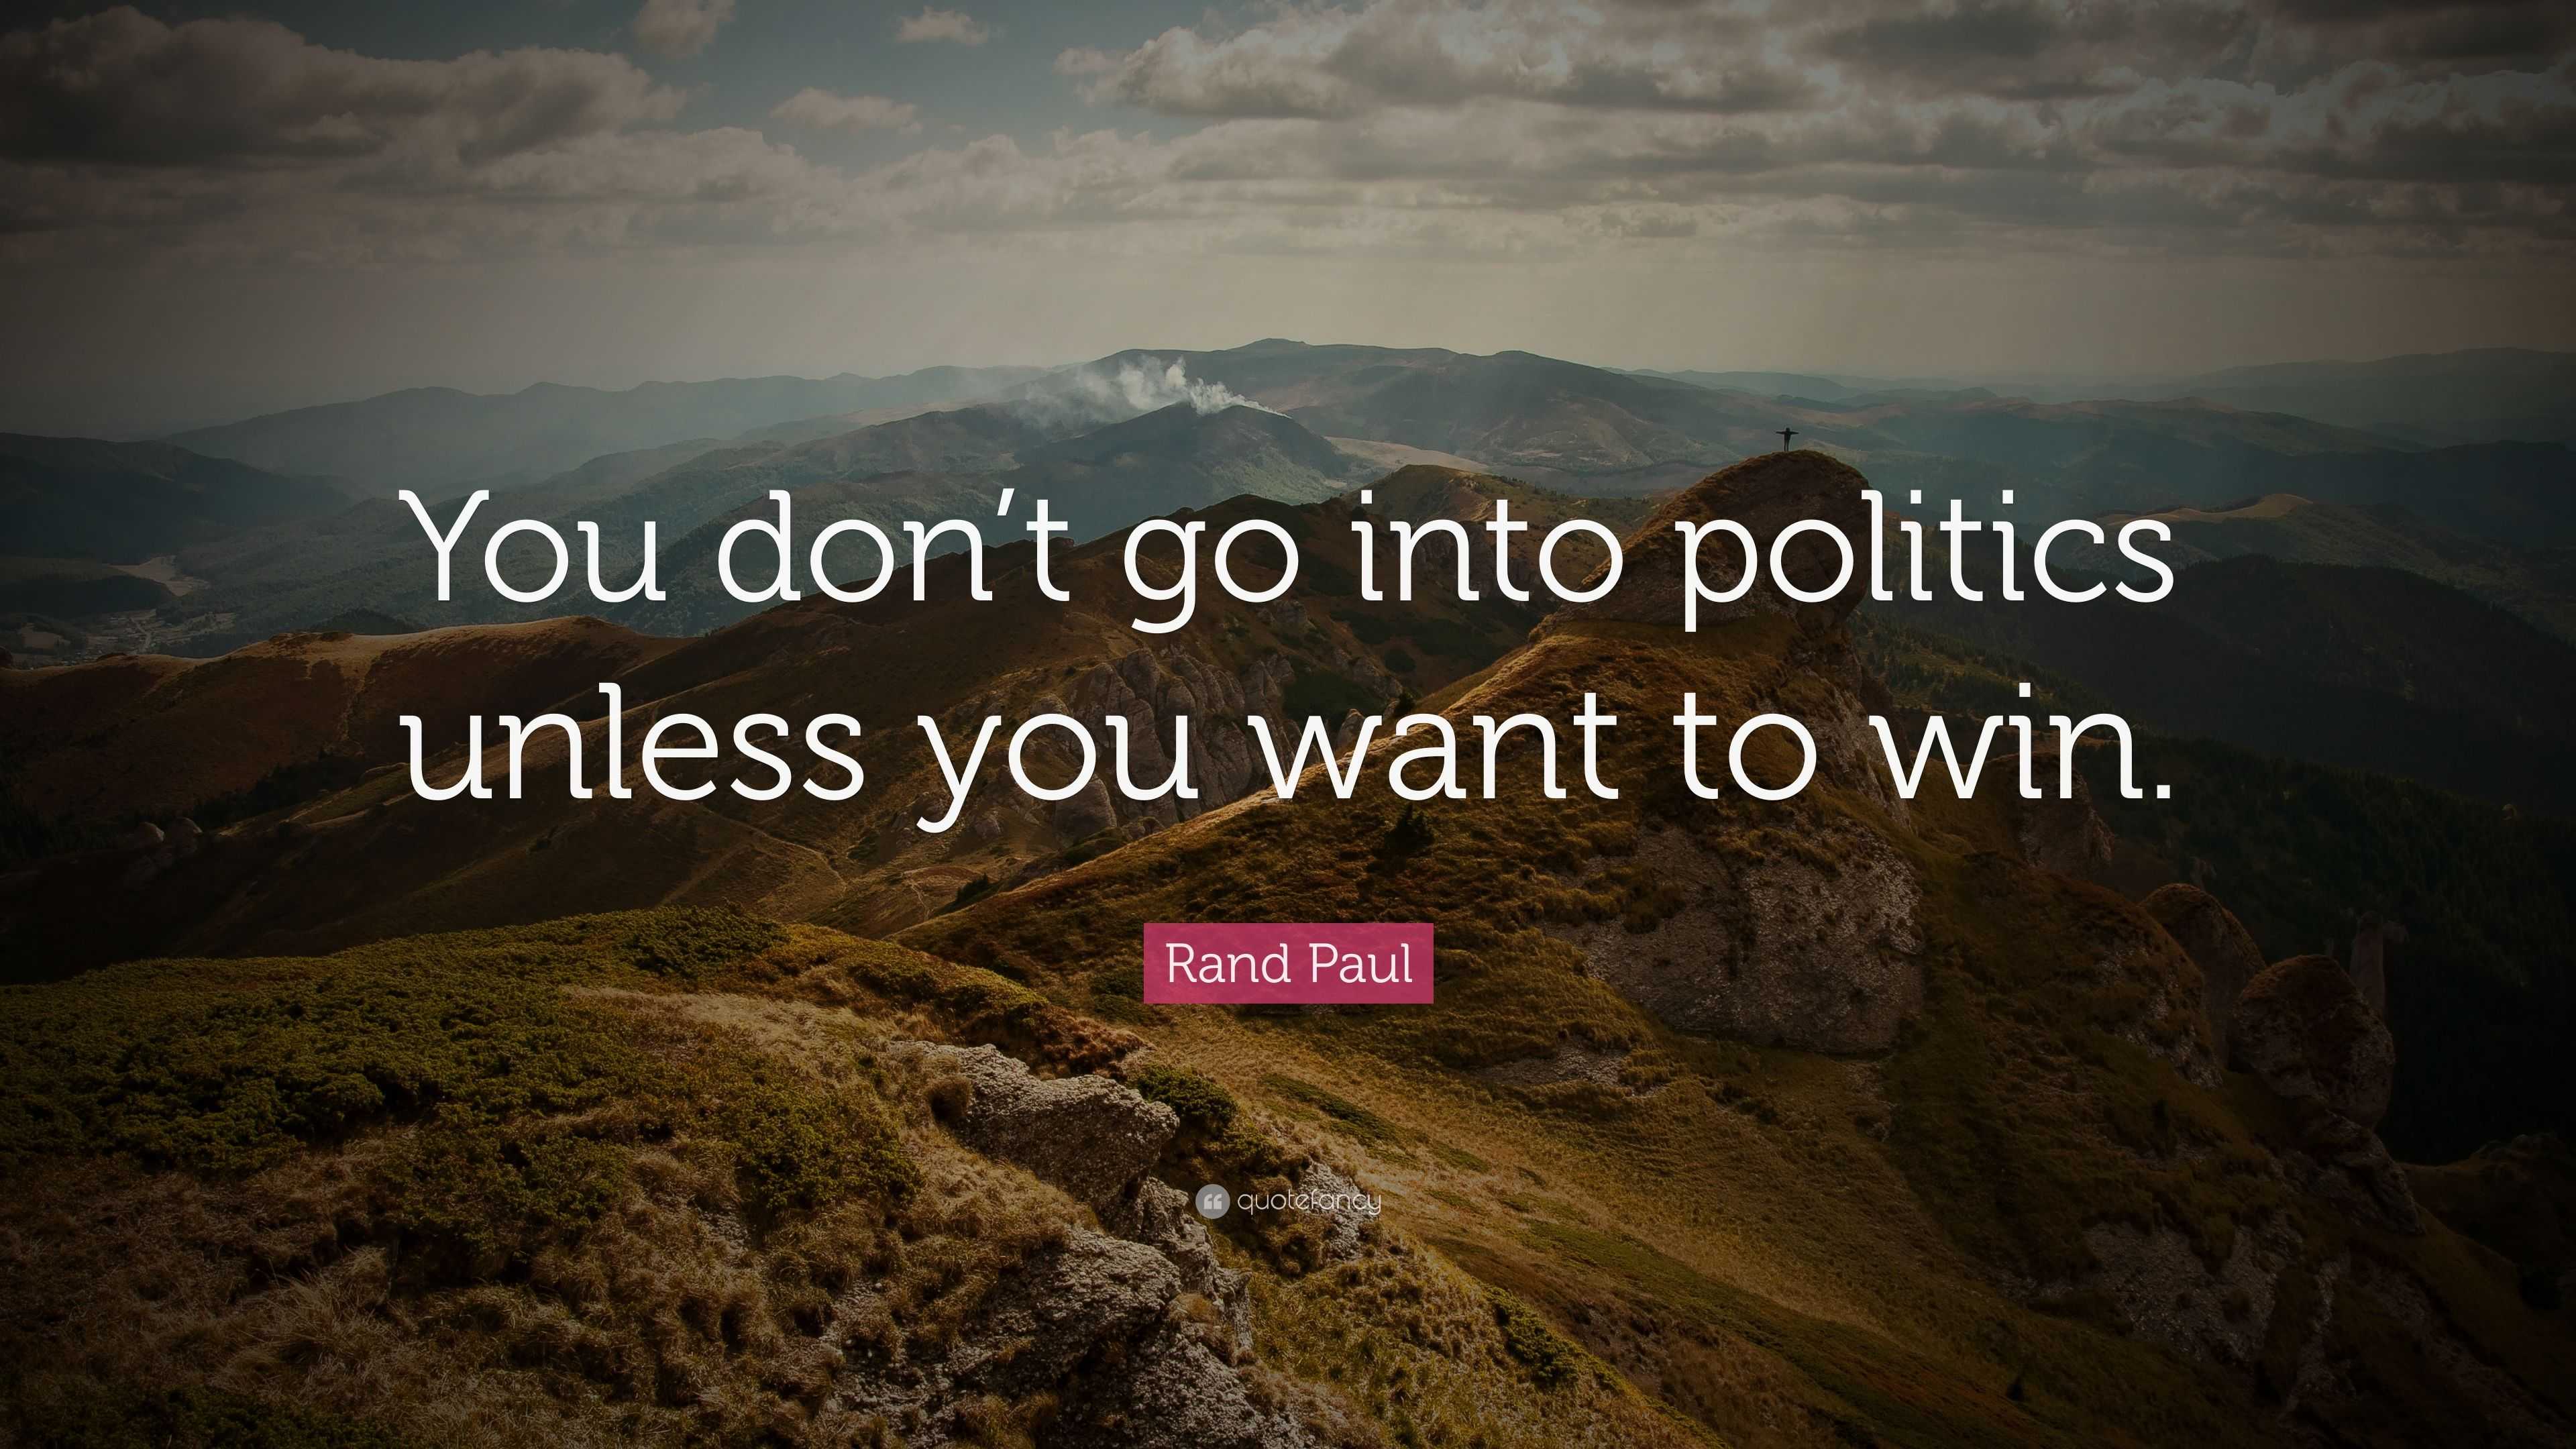 Rand Paul Quote: “You don’t go into politics unless you want to win.”